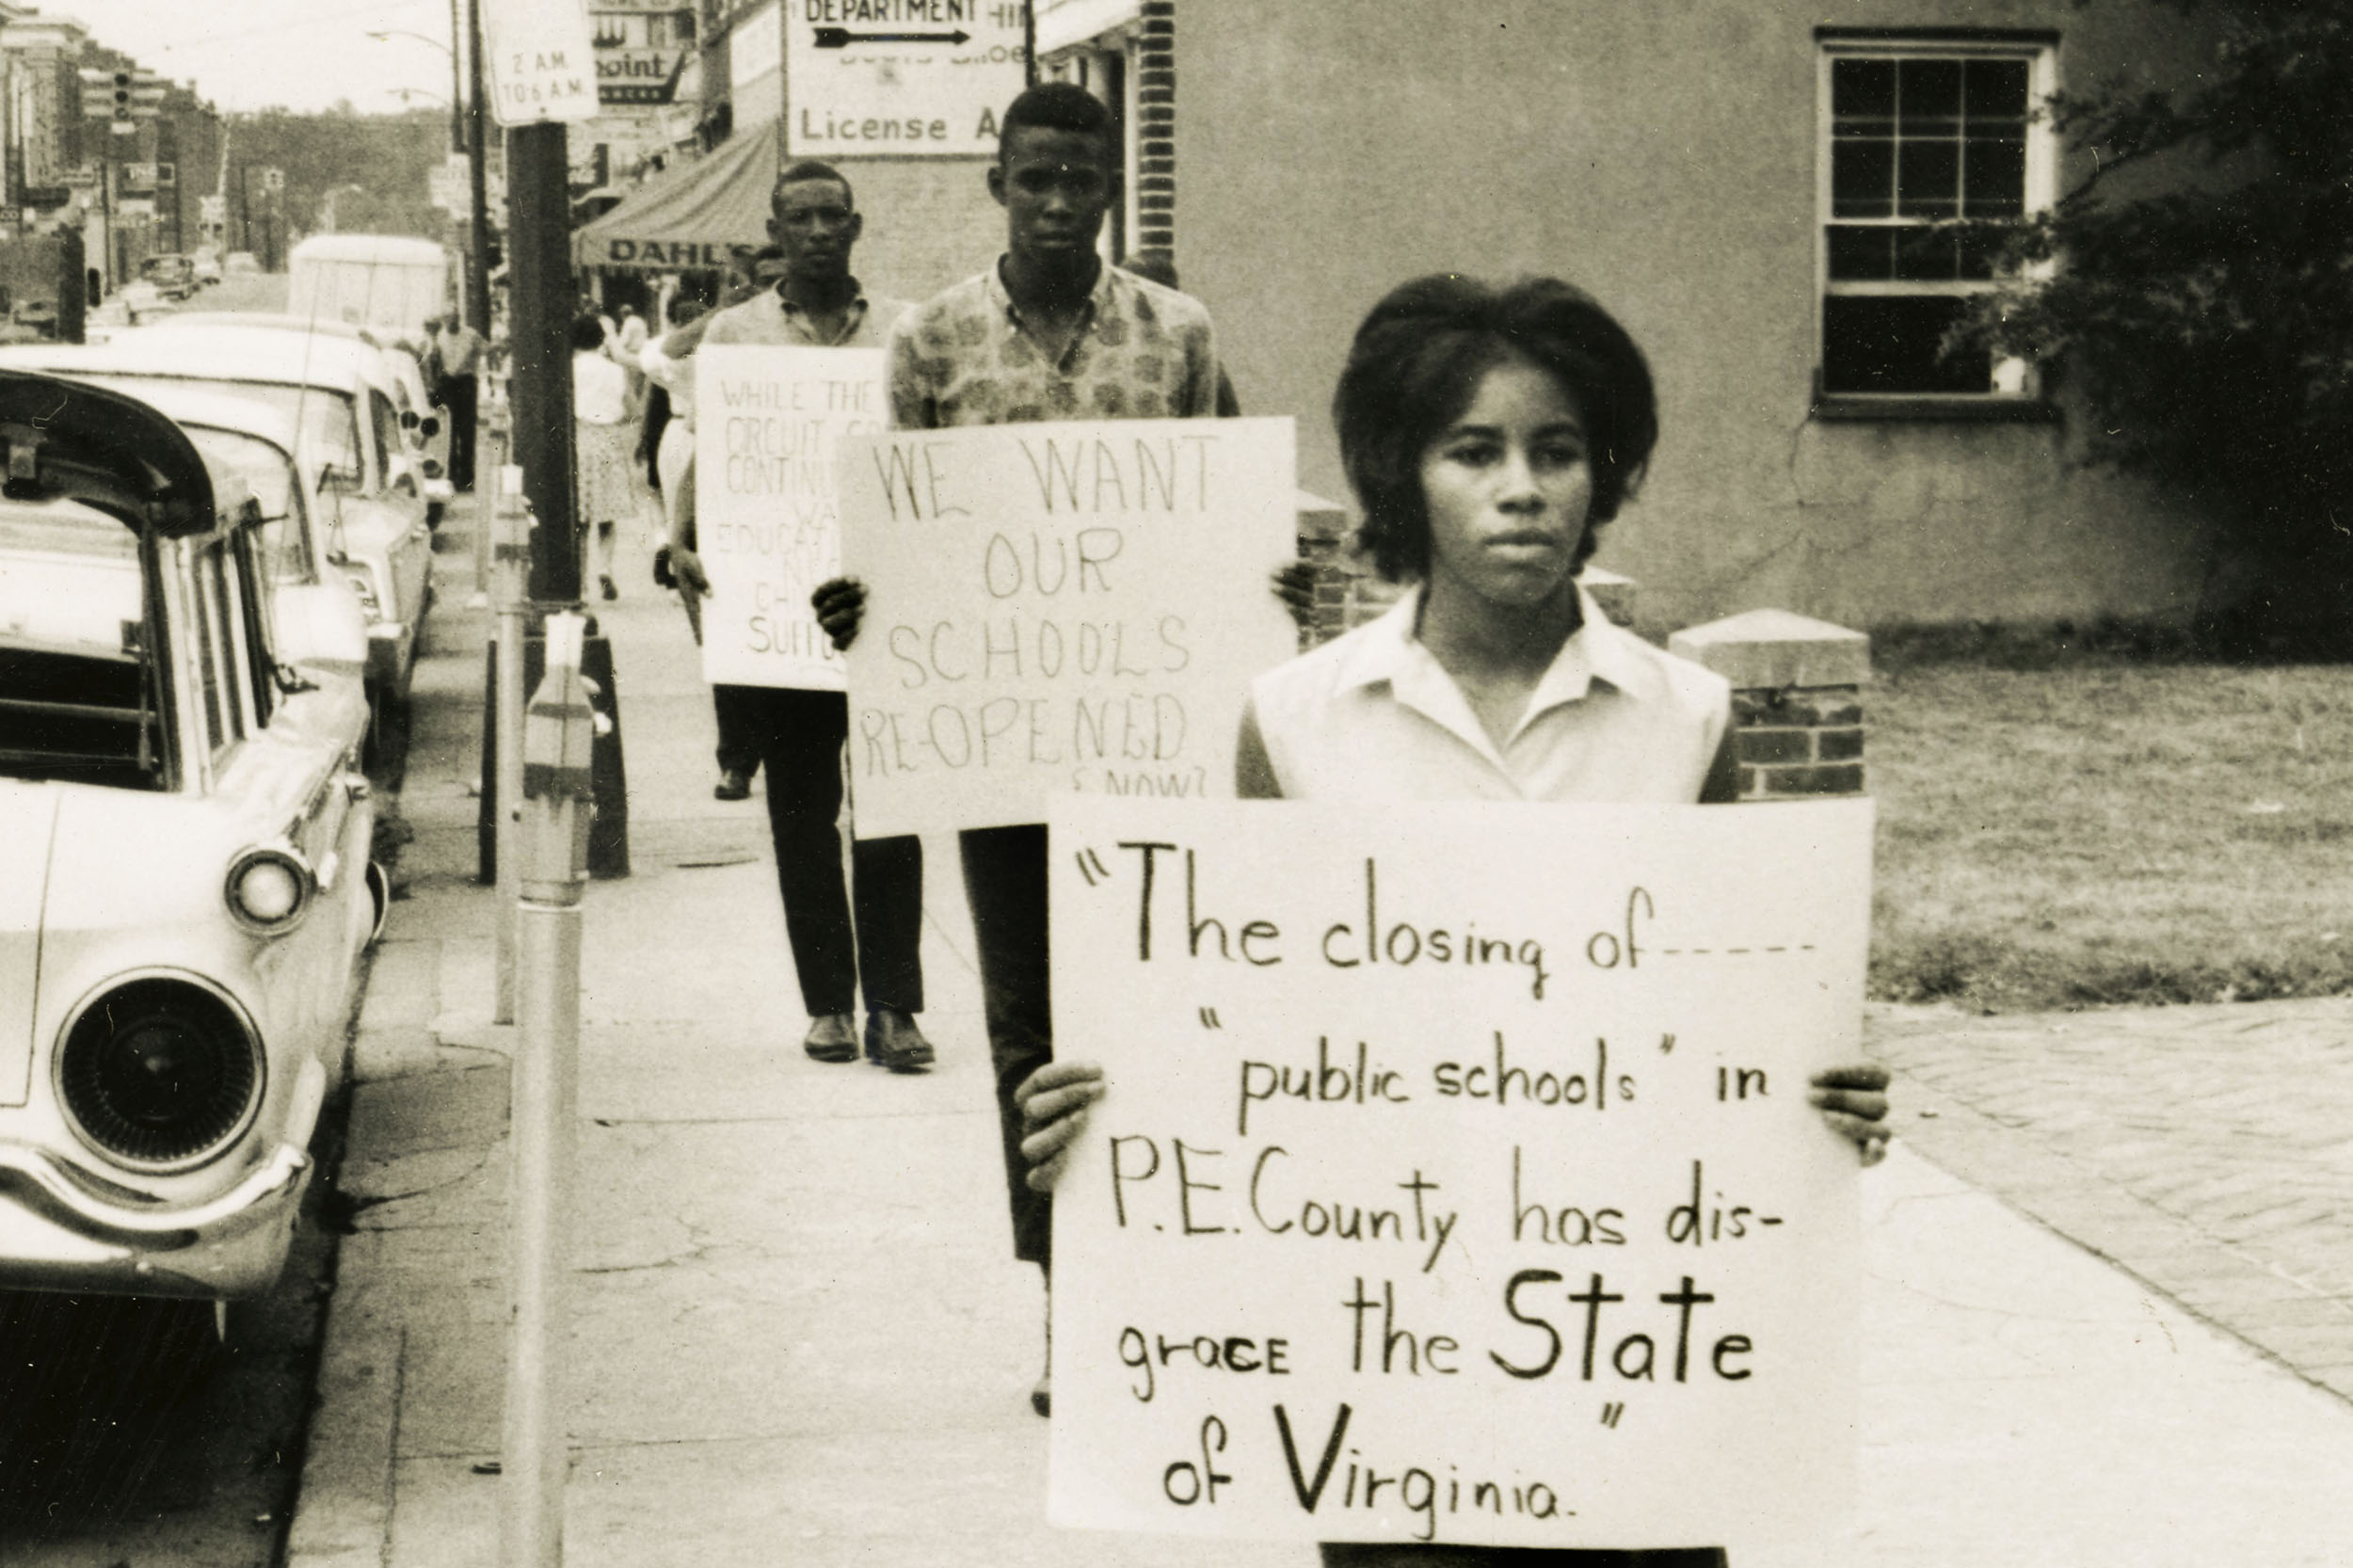 African Americans protesting on a public street with a sign that reads: the closing of public schools in p.e. county has Disgrace the state of Virginia